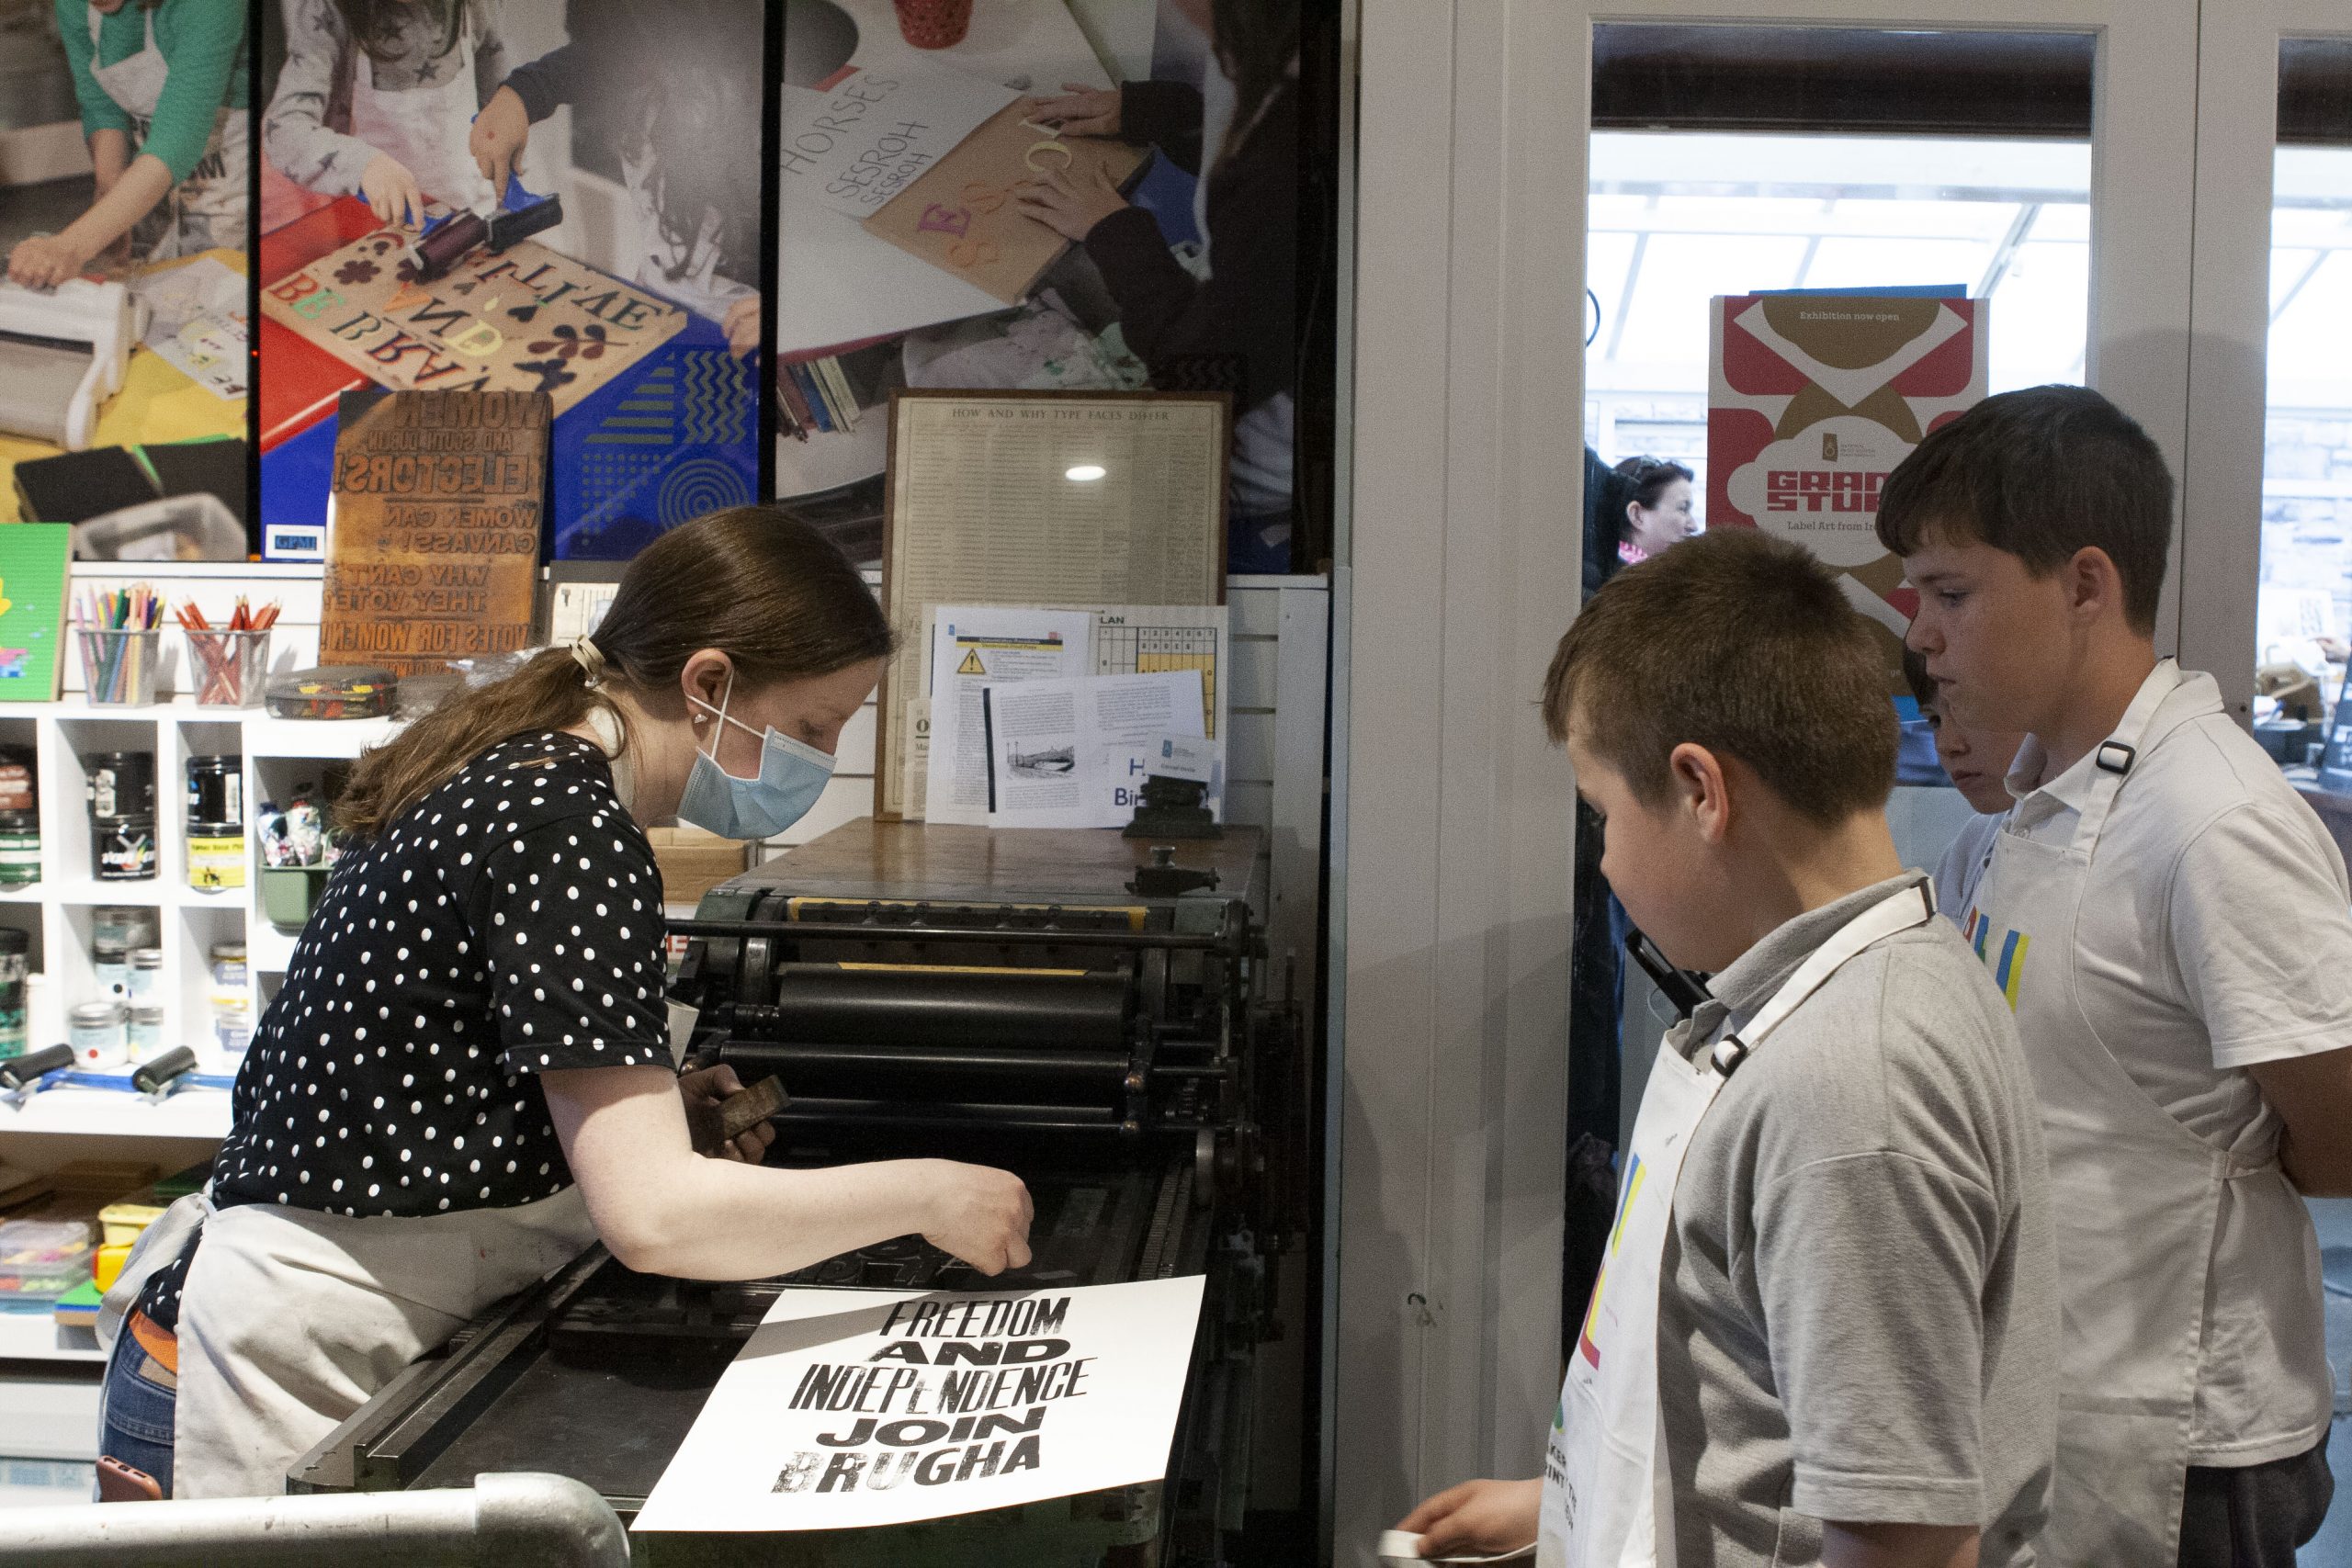 Mary Plunkett showing students how to use the letterpress for printing.